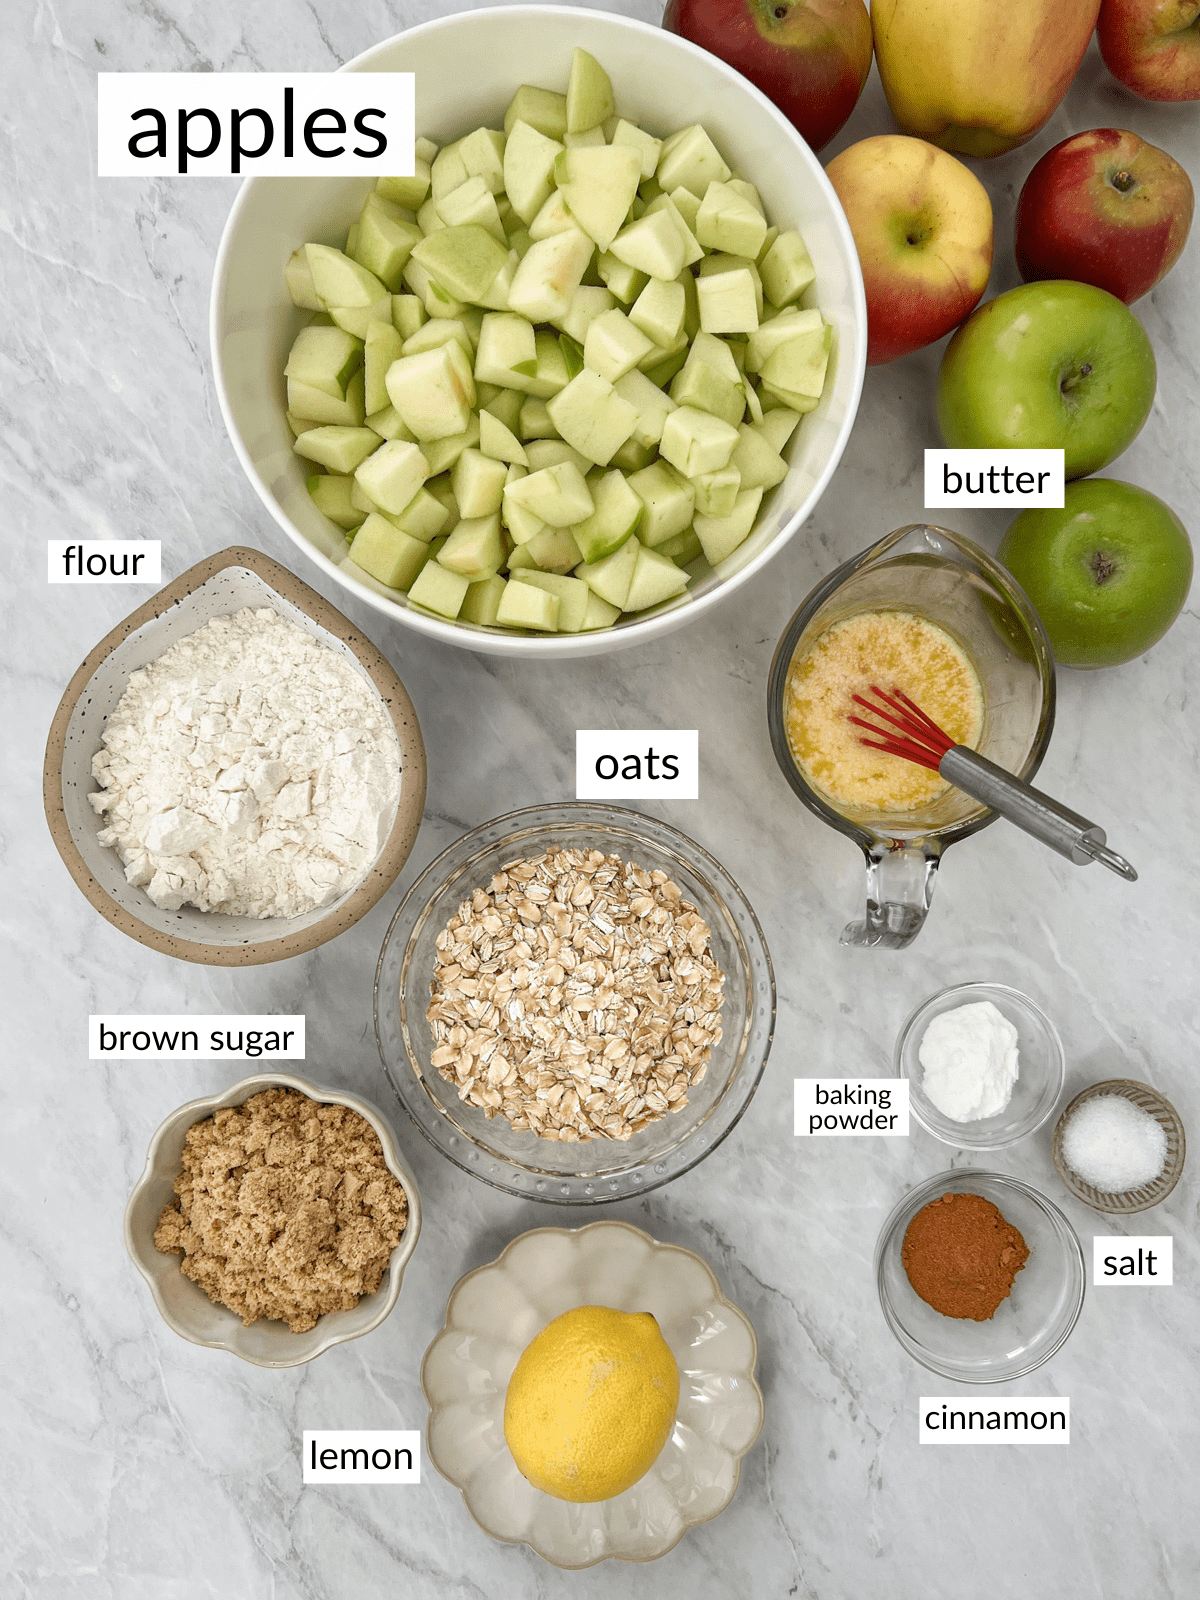 Ingredients in small bowls for apple crisp.